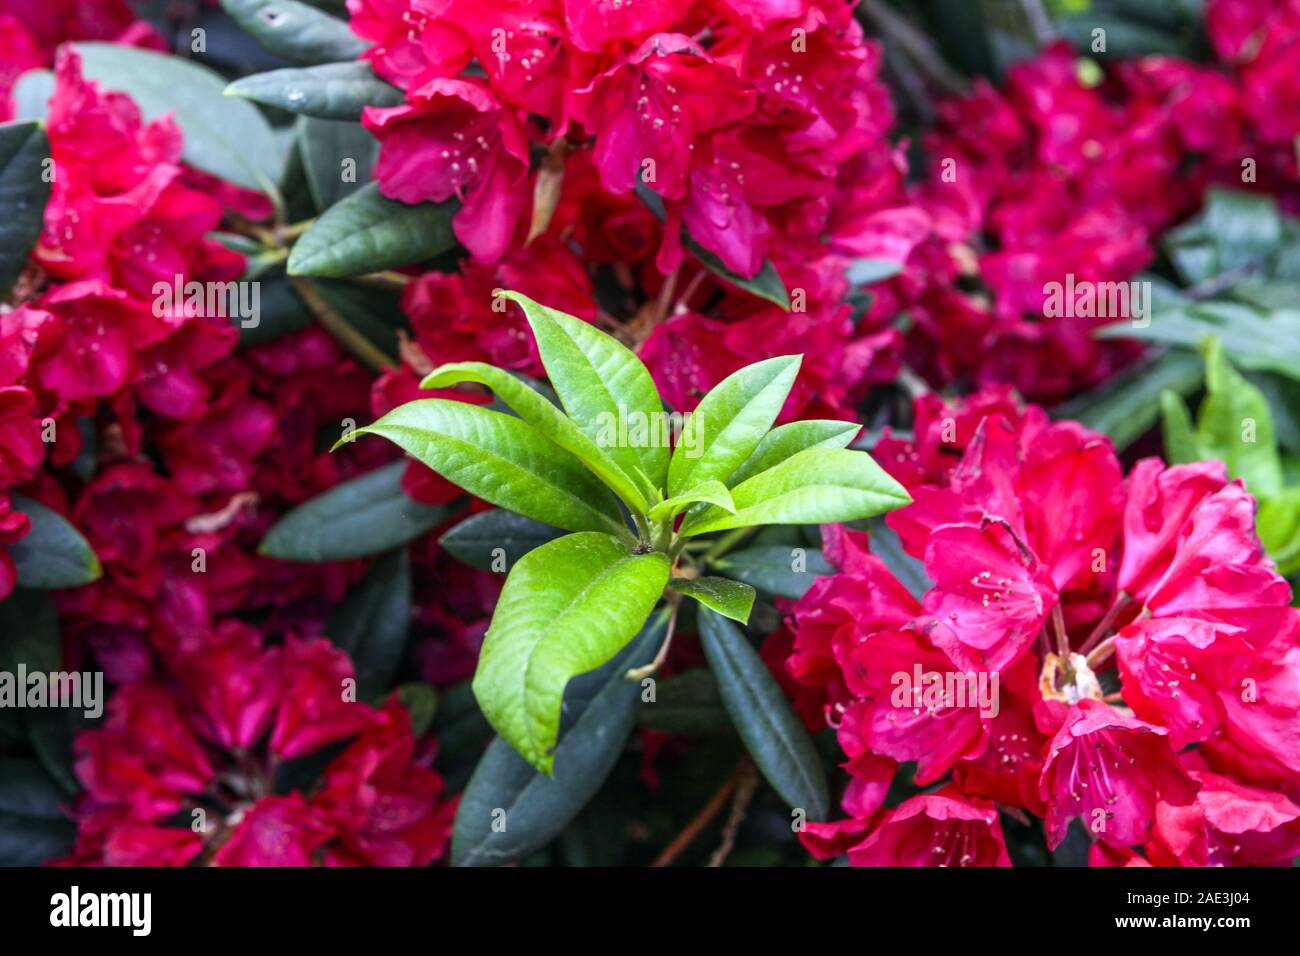 Red rhododendron blossoms Stock Photo